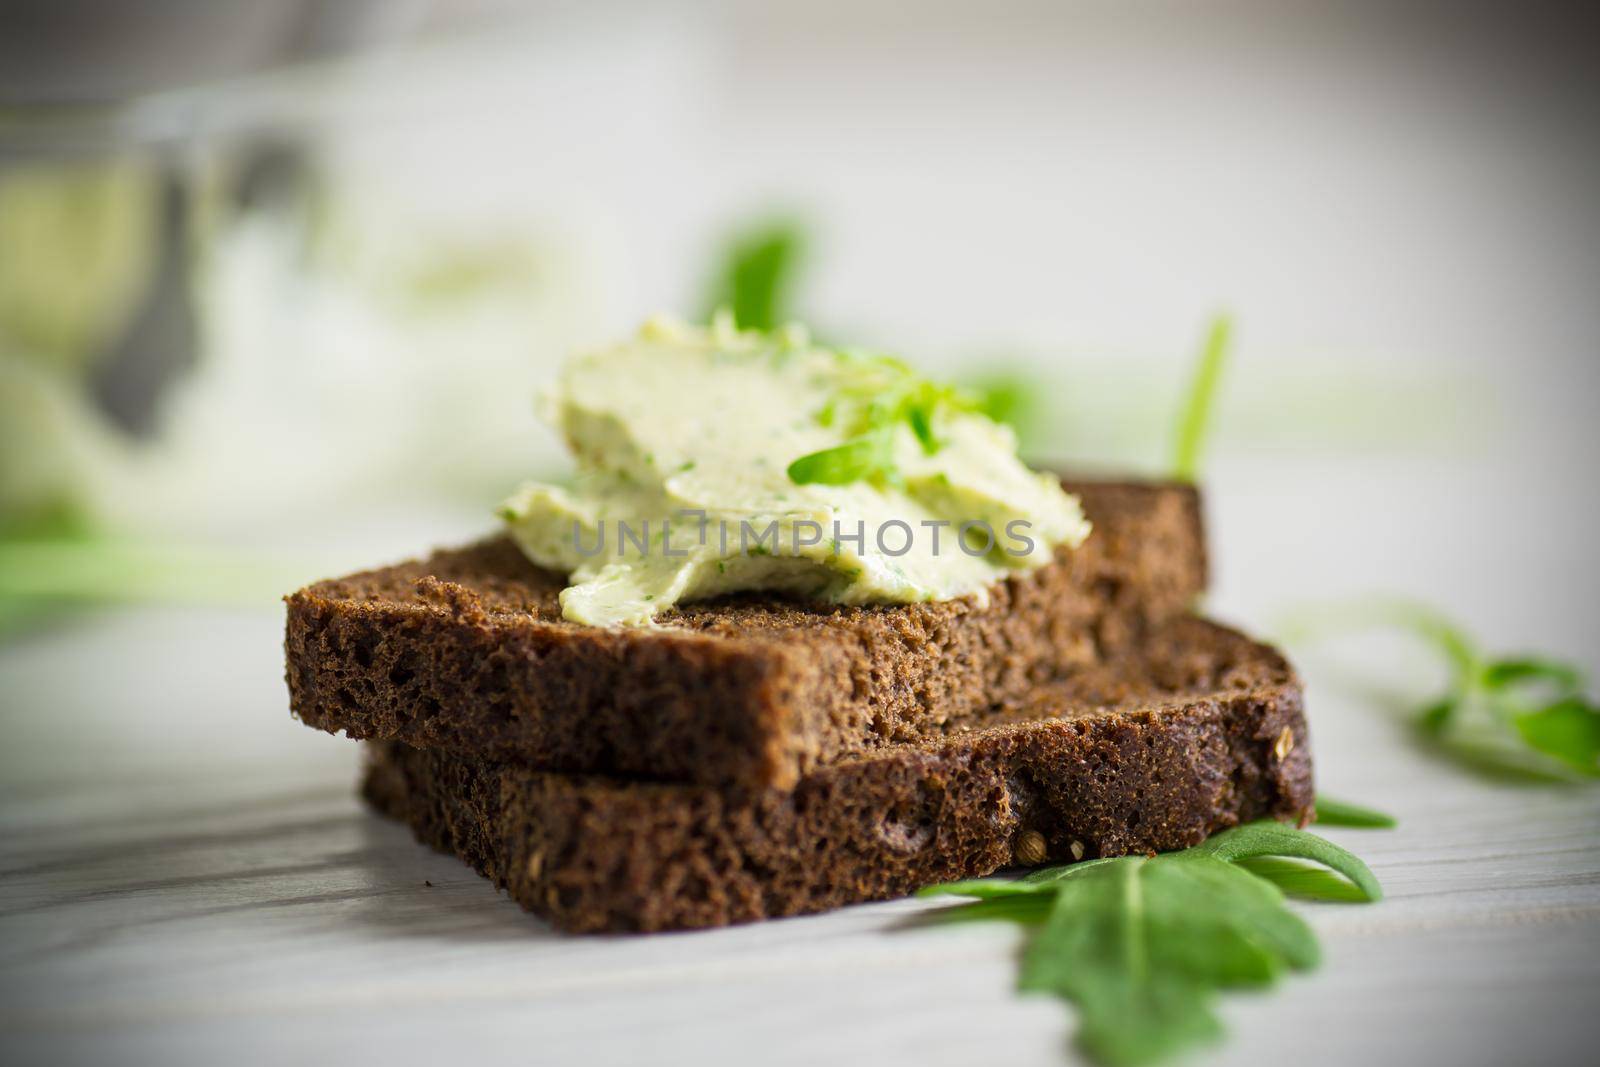 bread cheese spread with garlic and arugula on dark bread, on a wooden table.